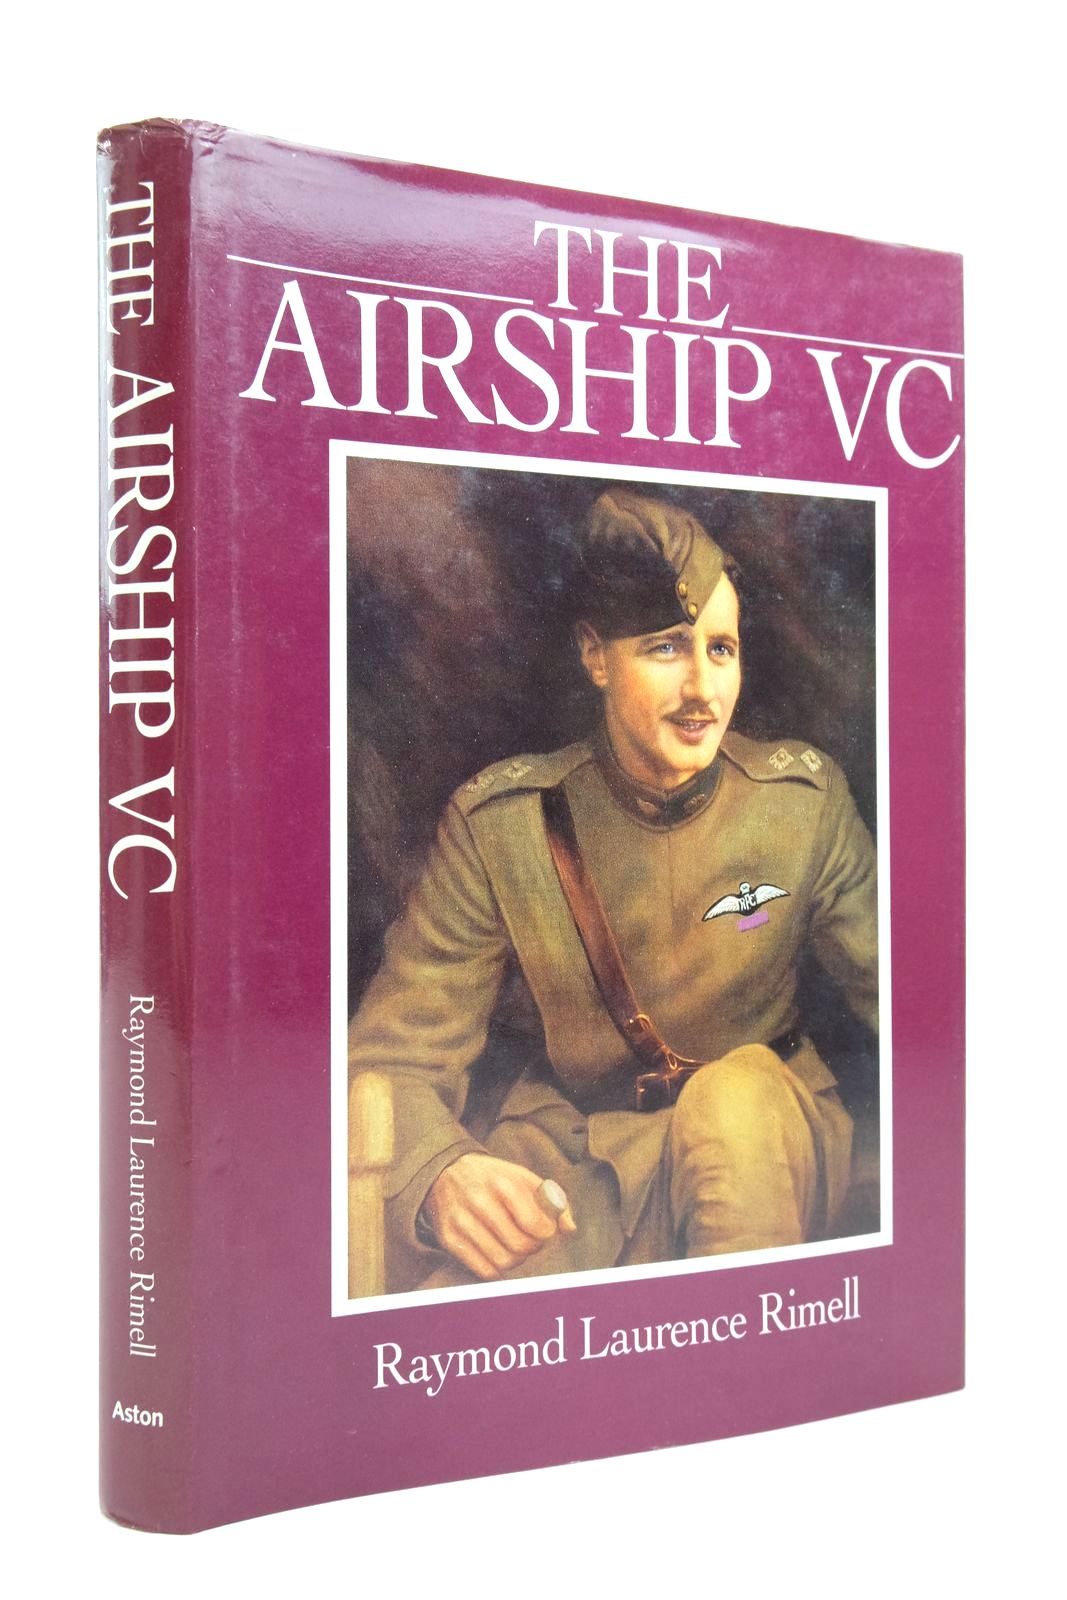 Photo of THE AIRSHIP VC THE LIFE OF CAPTAIN WILLIAM LEEFE ROBINSON written by Rimell, Raymond Laurence published by Aston Publications (STOCK CODE: 2139811)  for sale by Stella & Rose's Books